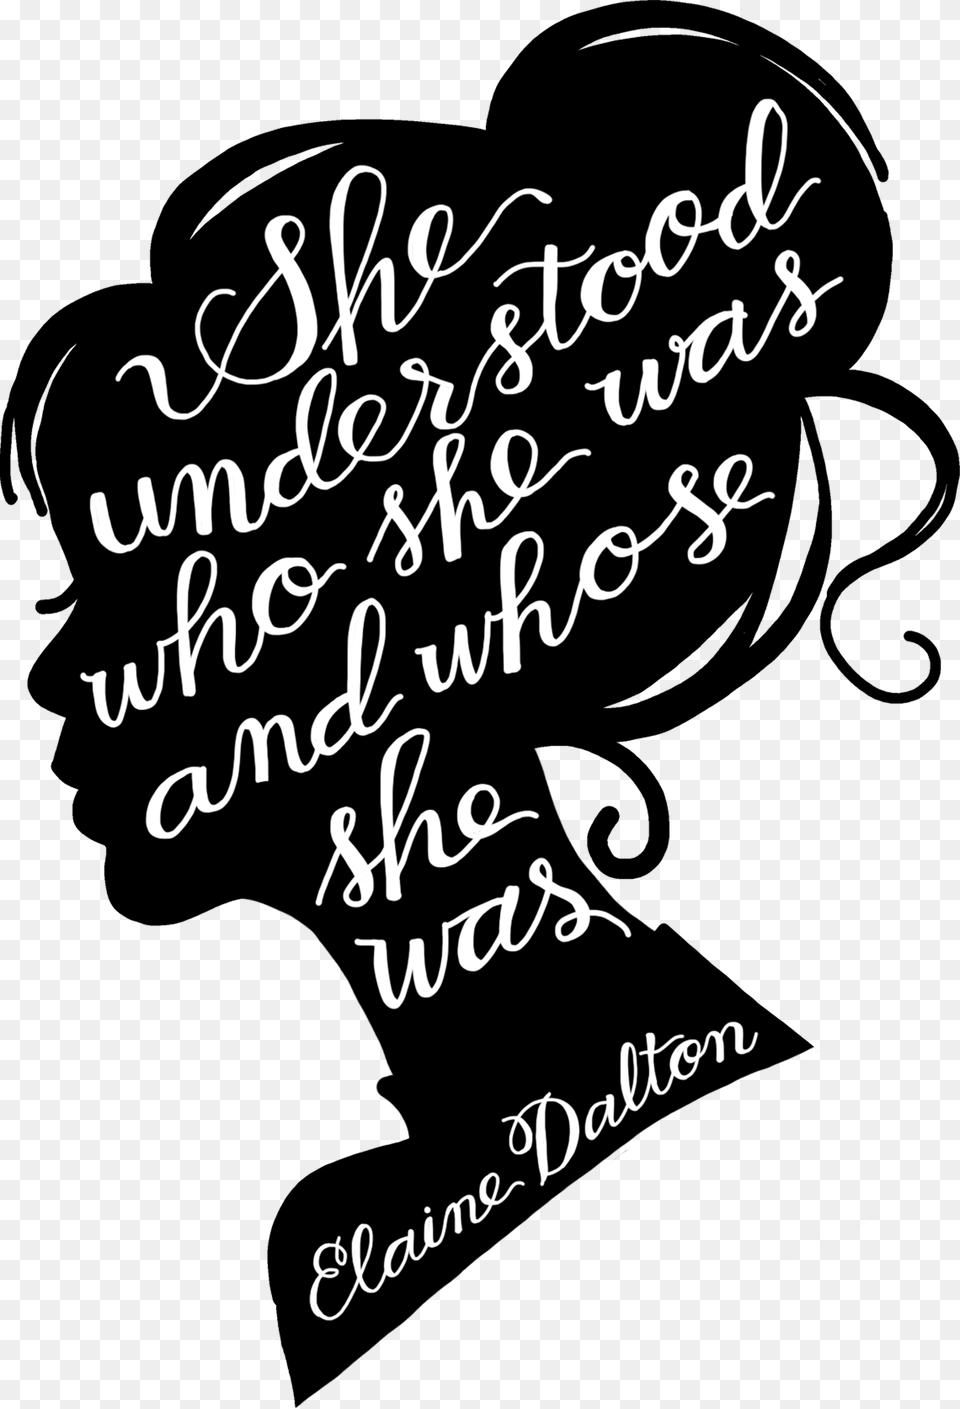 She Was And Whose She Was Quote, Text, Handwriting, Calligraphy Png